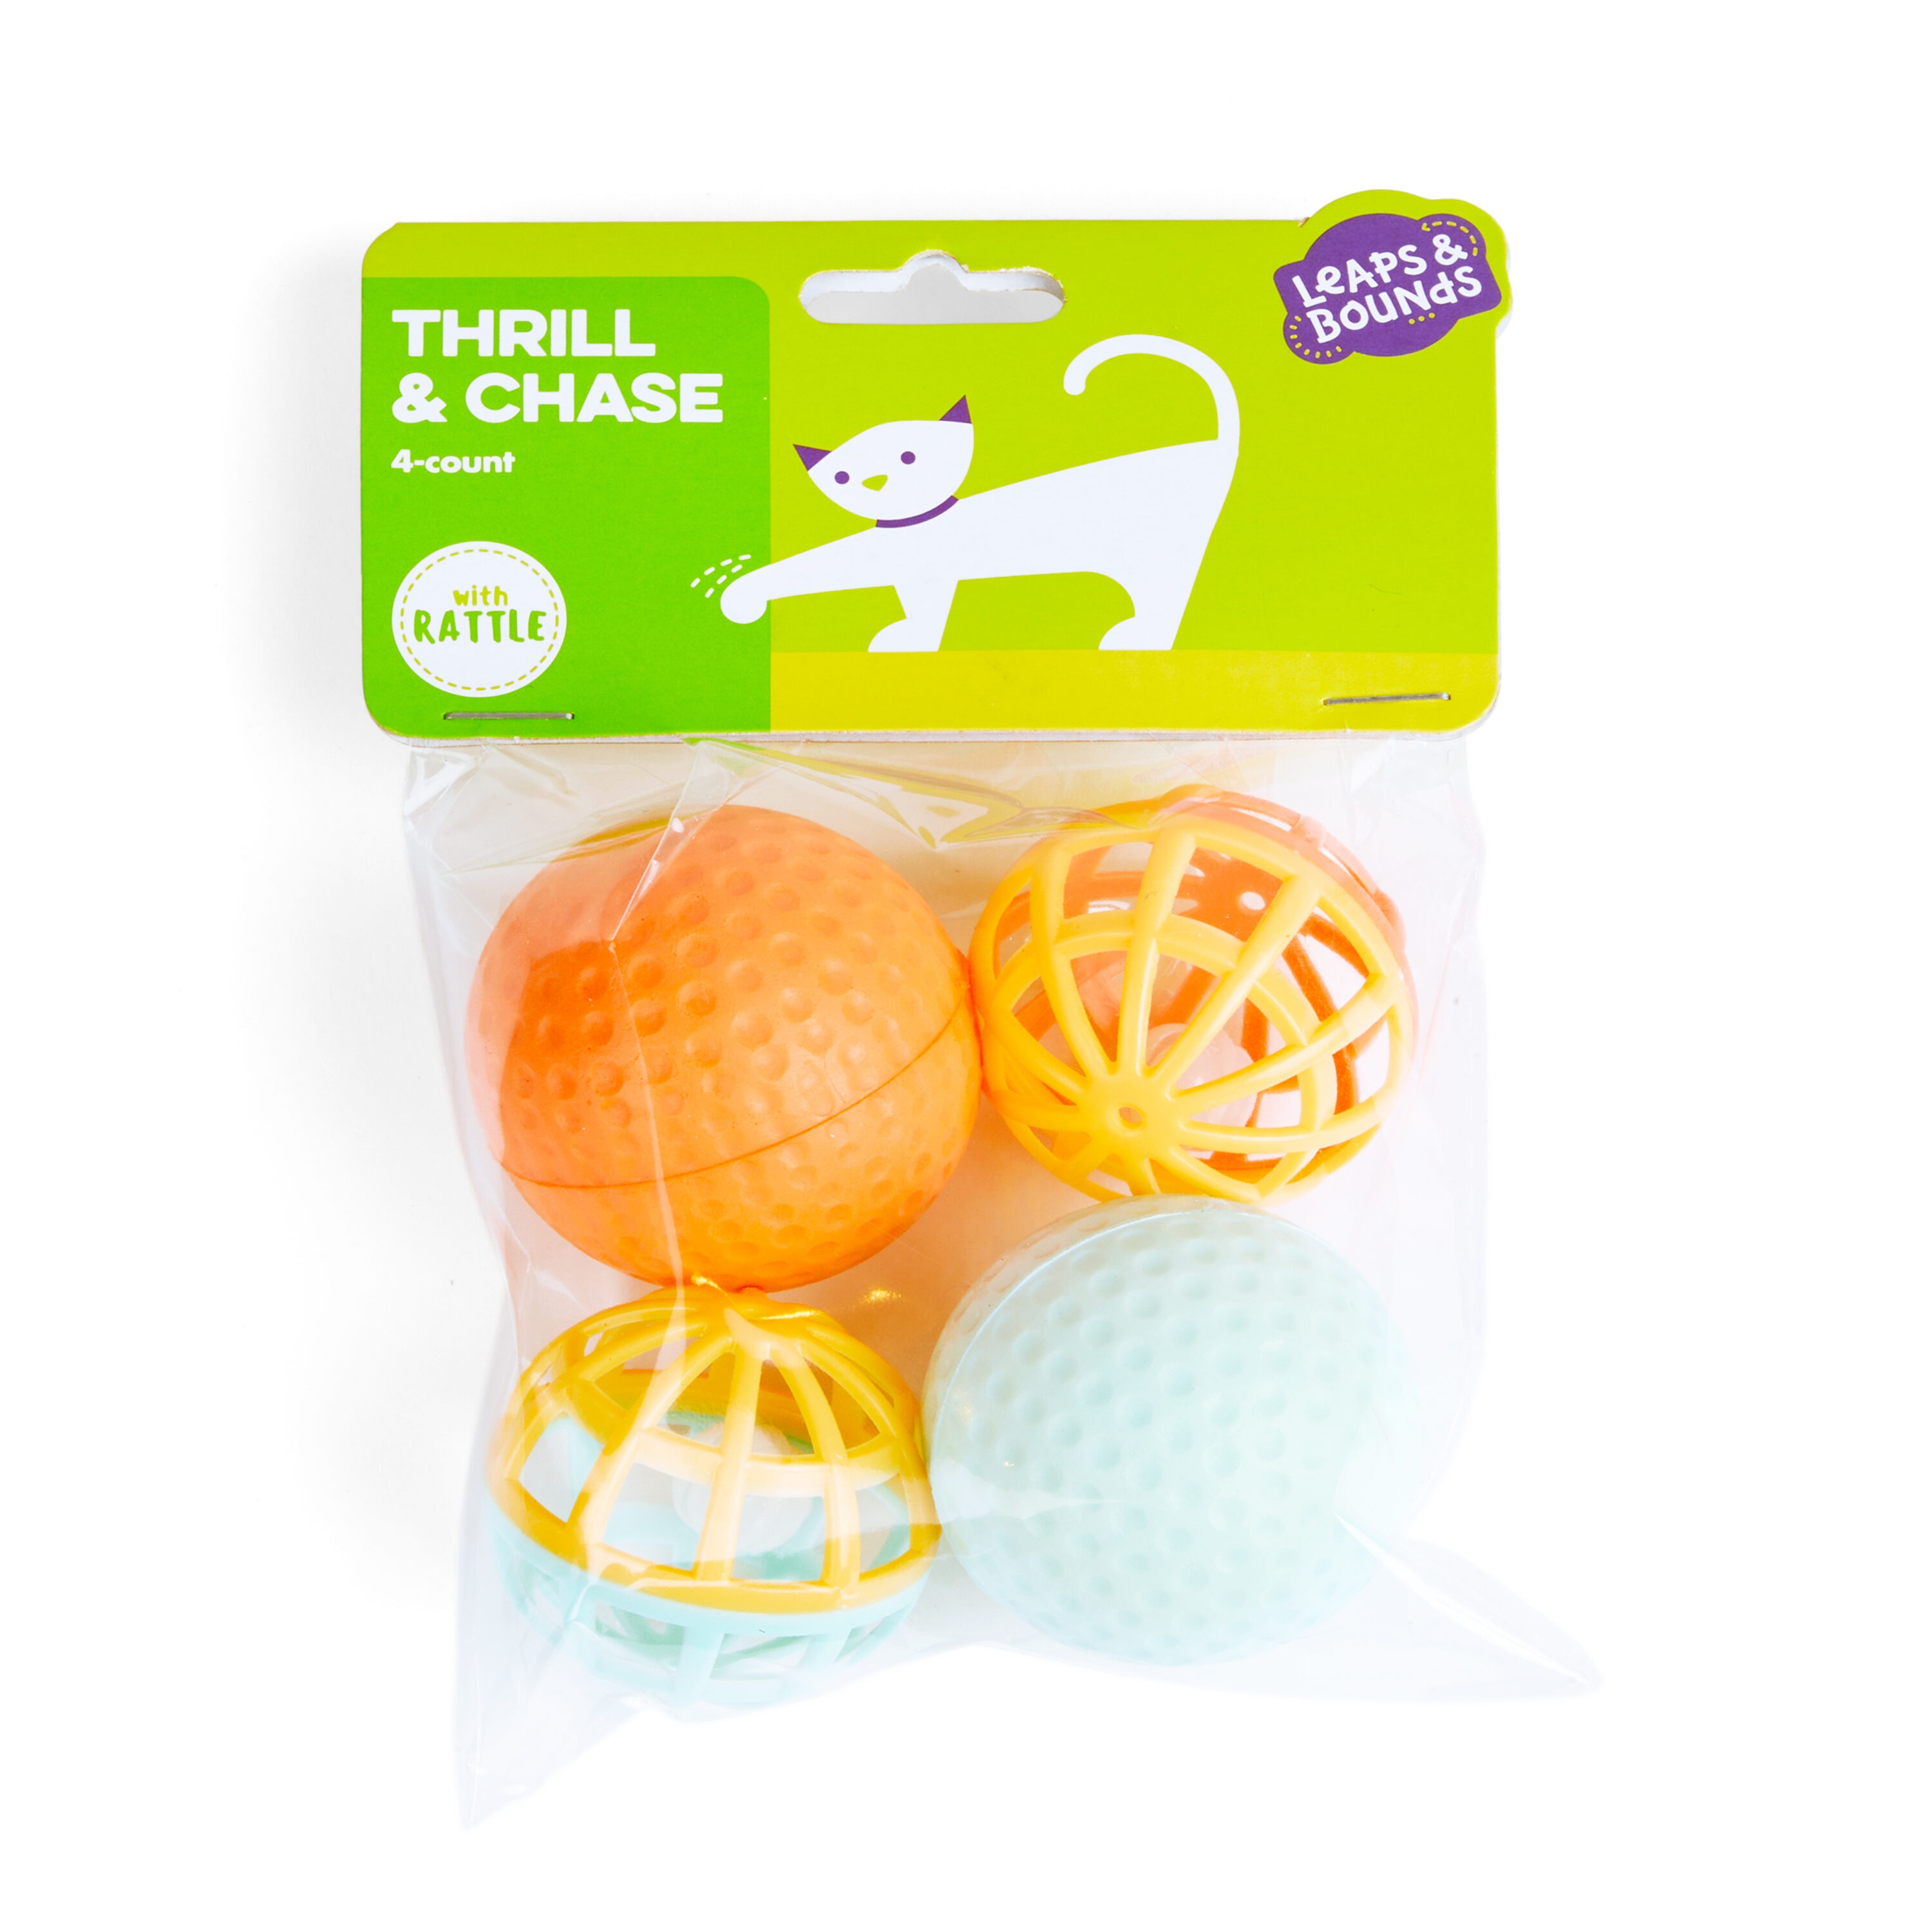 Leaps & Bounds Treat Dispensing Dog Toy